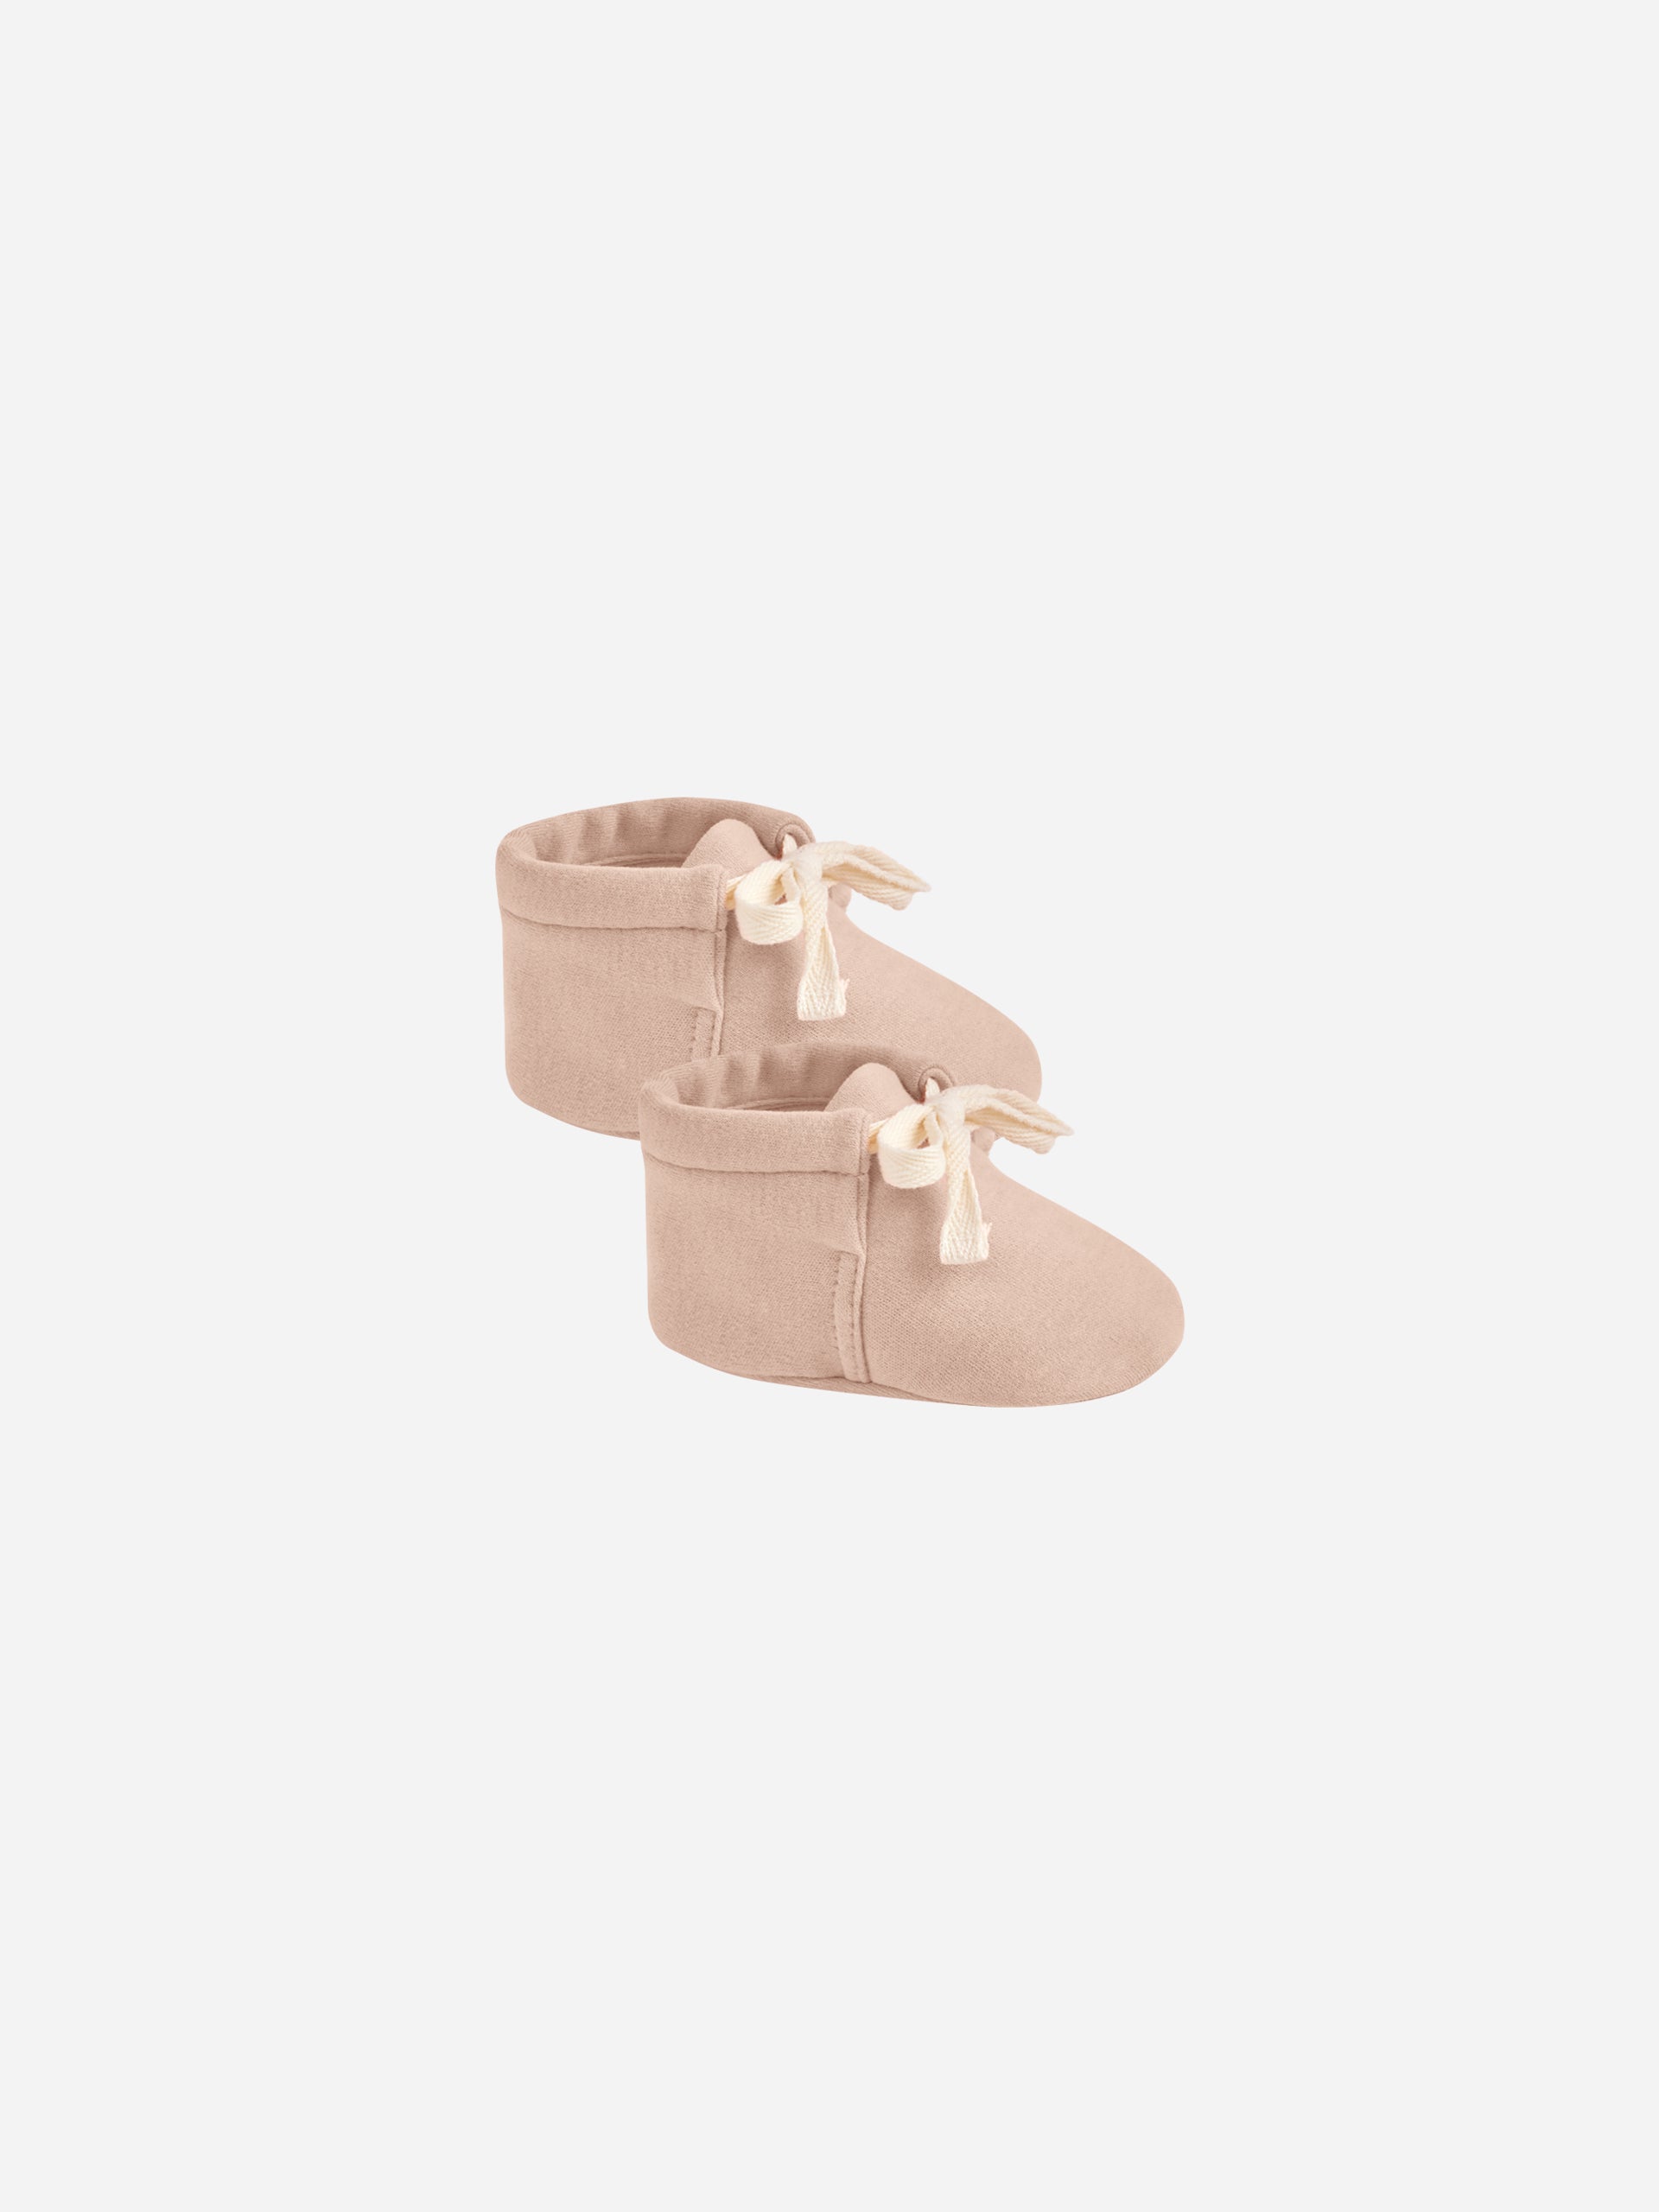 Baby Booties || Blush - Rylee + Cru | Kids Clothes | Trendy Baby Clothes | Modern Infant Outfits |